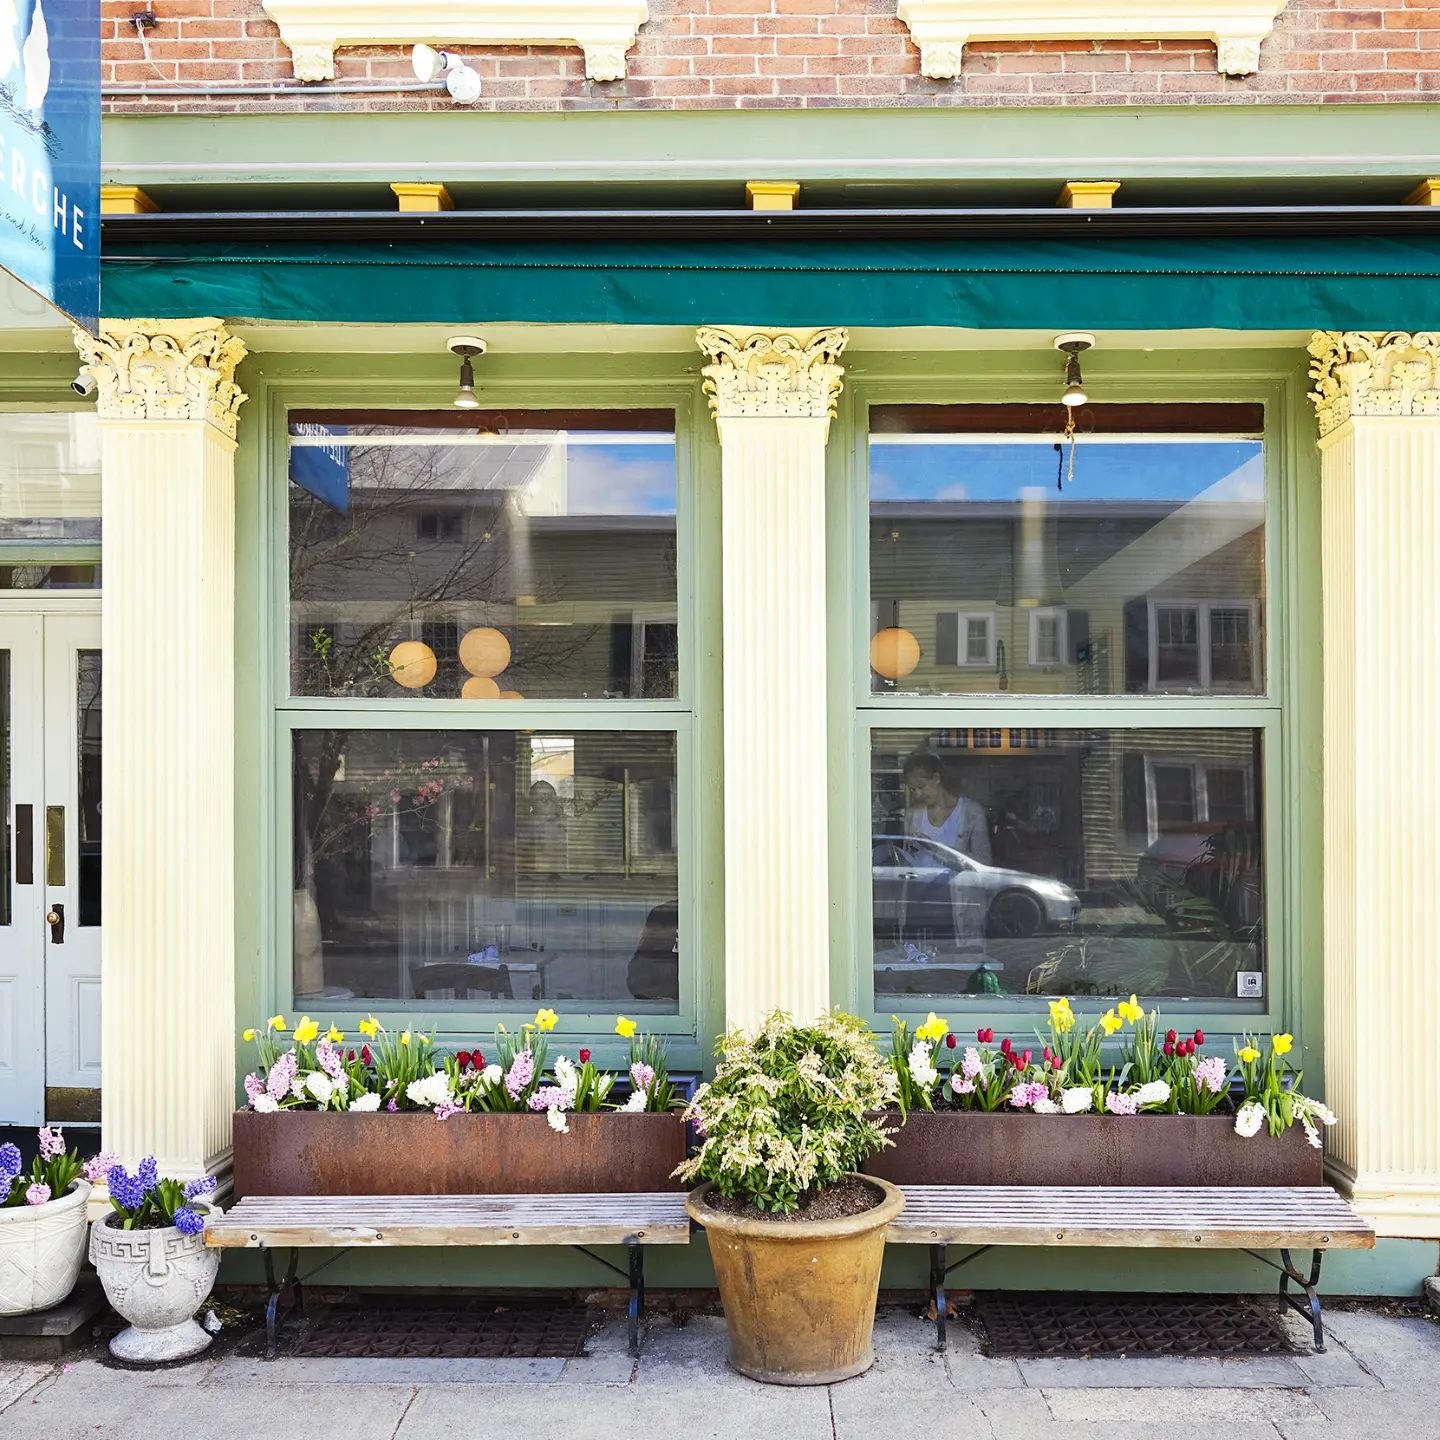 {fleurs de printemps}

Spring has sprung at Le Perche! Grab a bite indoors, or in our charming covered garden (with heat lamps when needed!).

Book your table on #Resy.
.
.
#leperchehudson #hudsonvalleyny #hudsonny #warrenstreet
#daytimeeatery#breakf